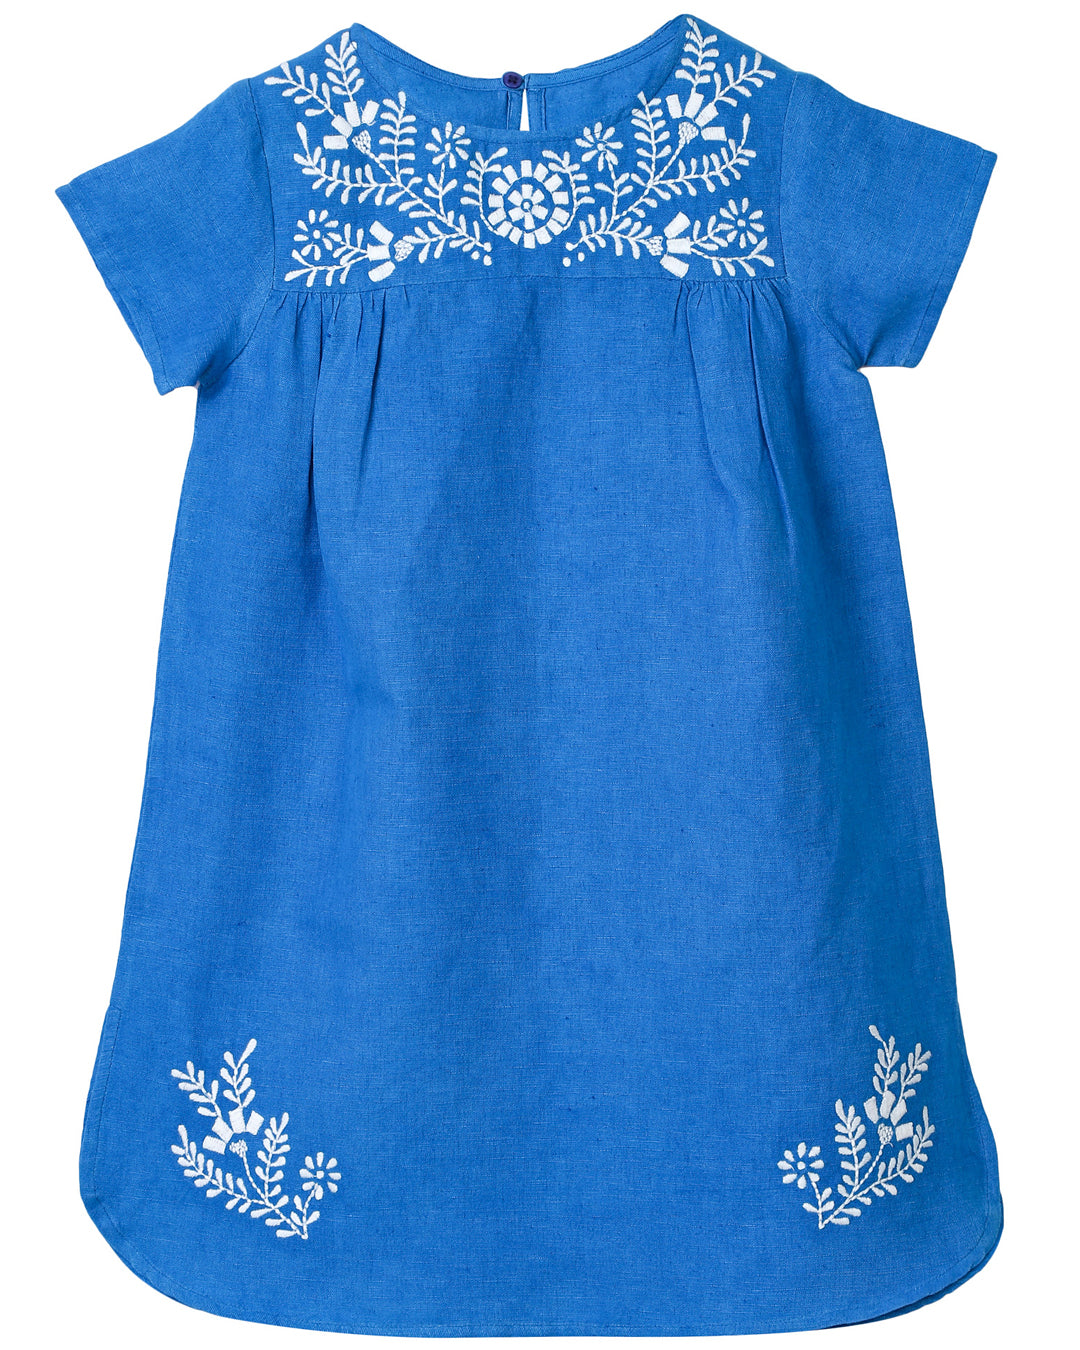 Linen Dress In A Striking  Blue With Embroidery